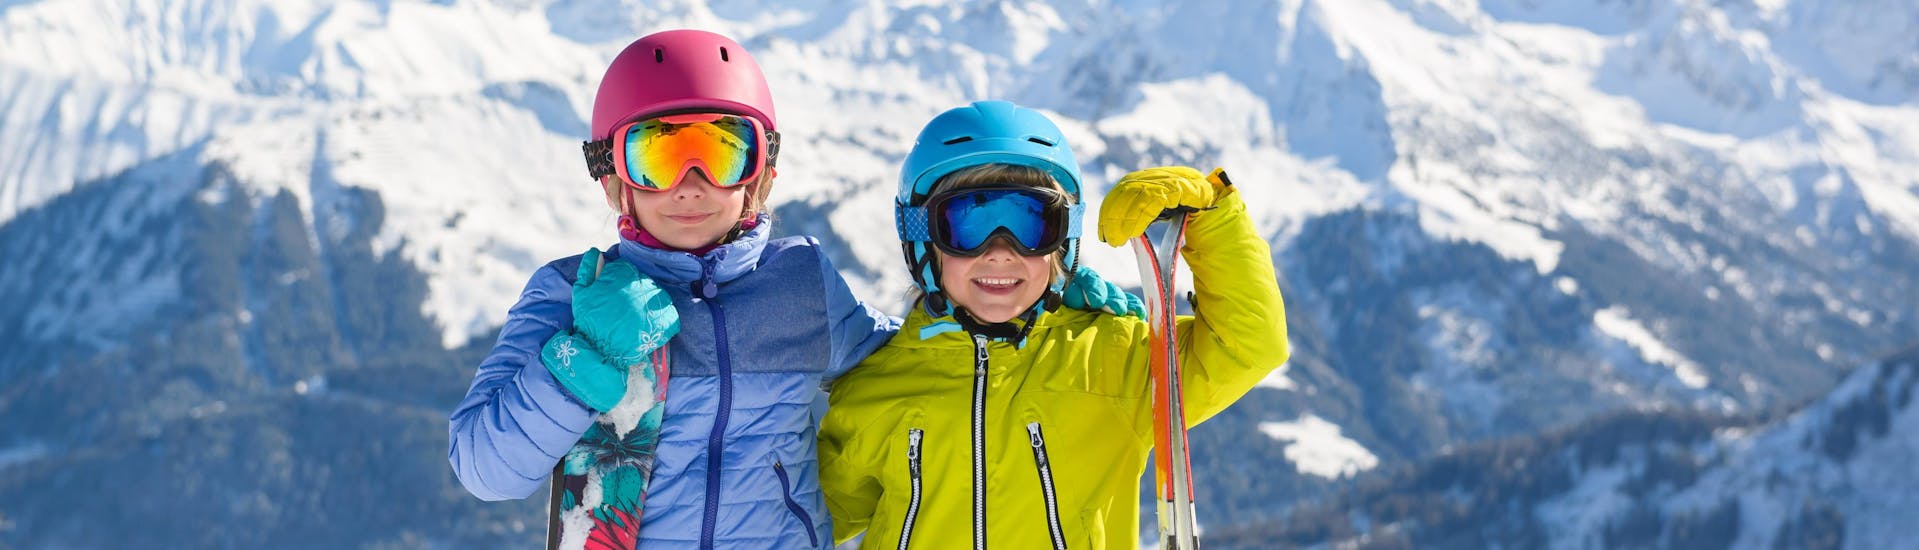 Two children in full skiing gear are smiling at the camera as they prepare for their kids ski lessons on top of the mountain.